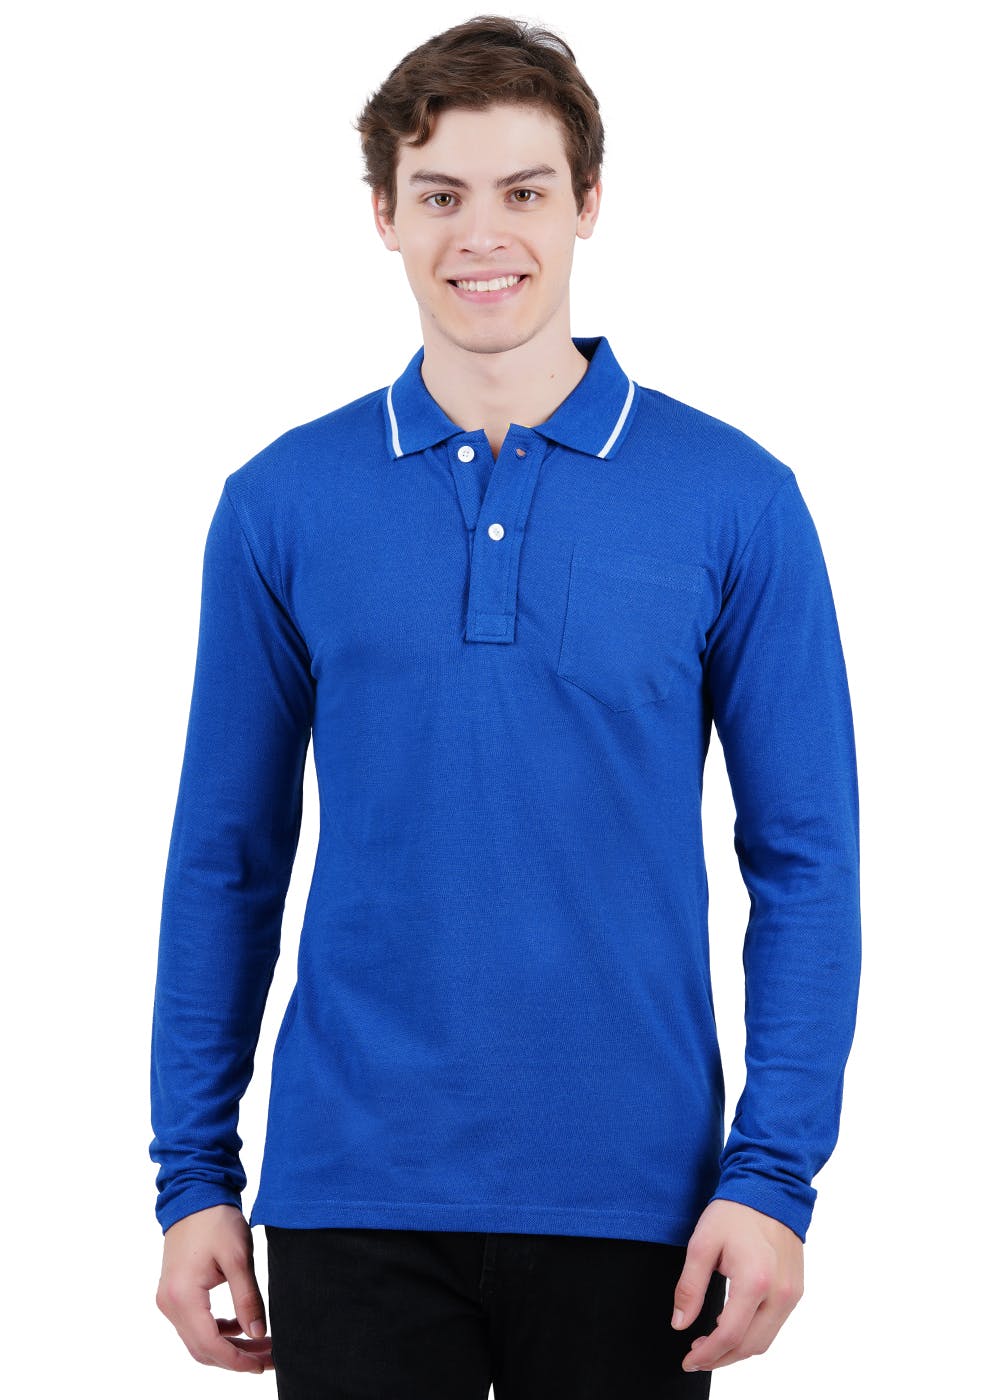 collar t shirt with full sleeves